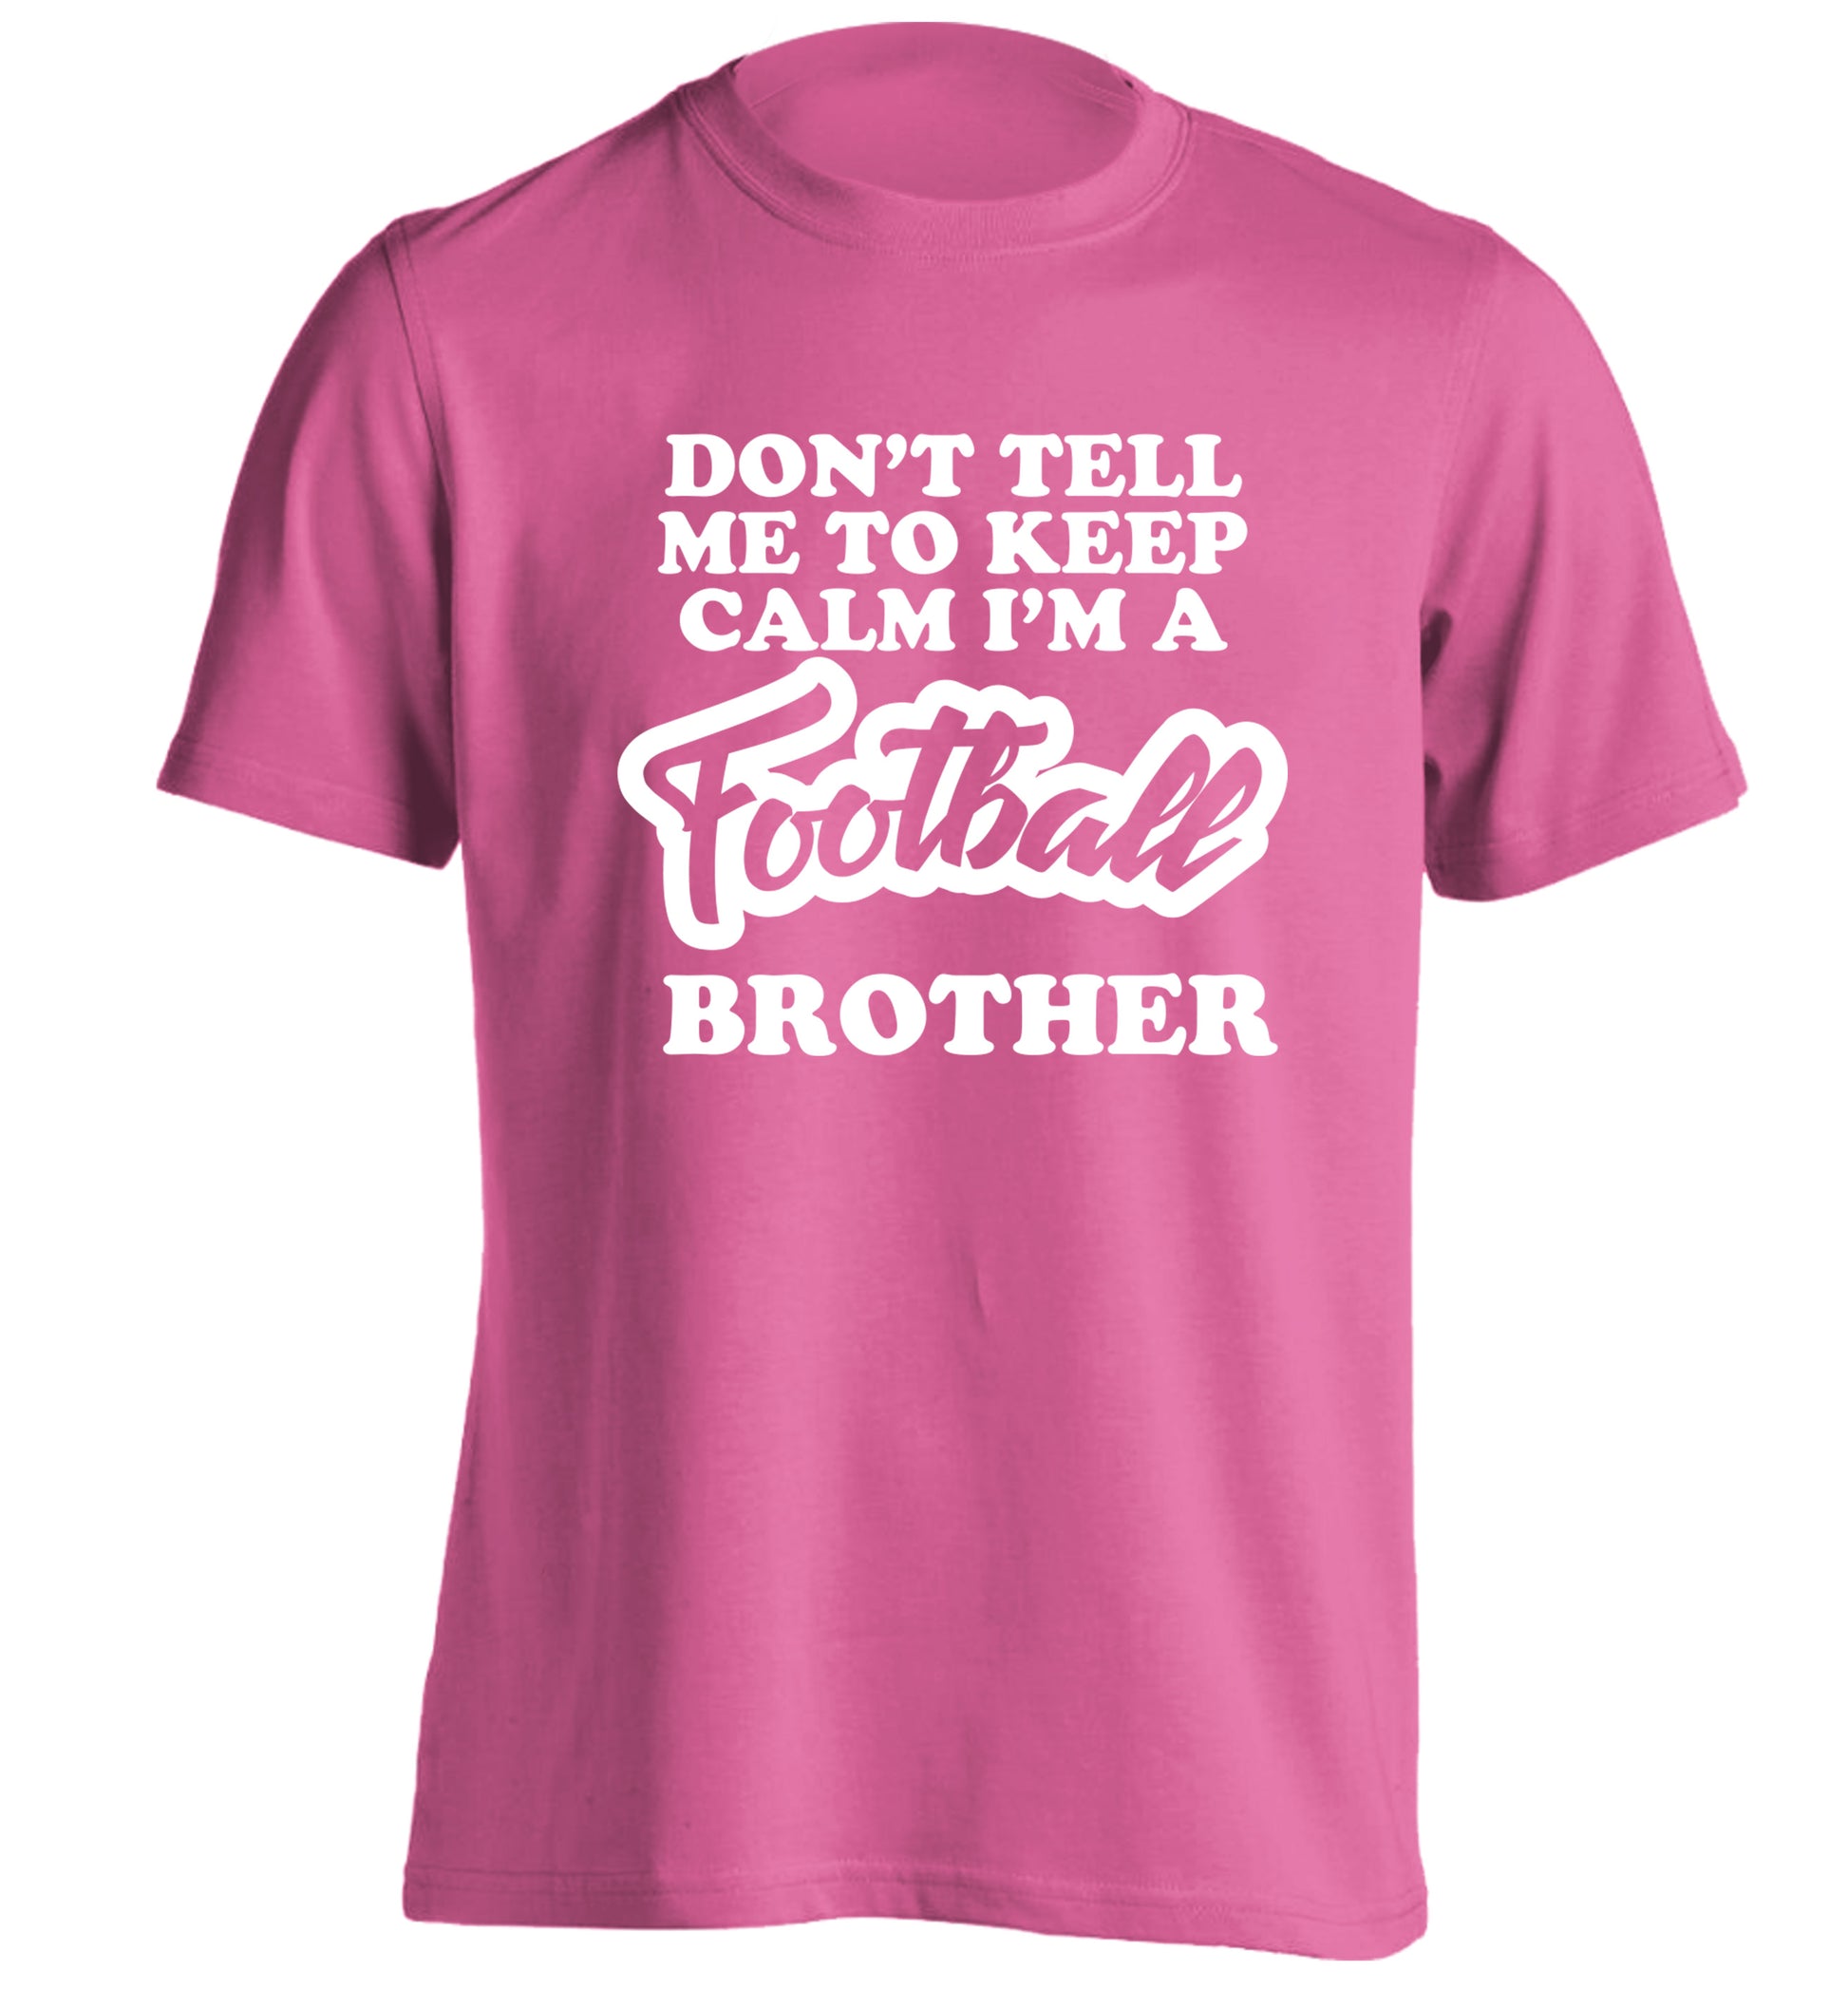 Don't tell me to keep calm I'm a football brother adults unisexpink Tshirt 2XL